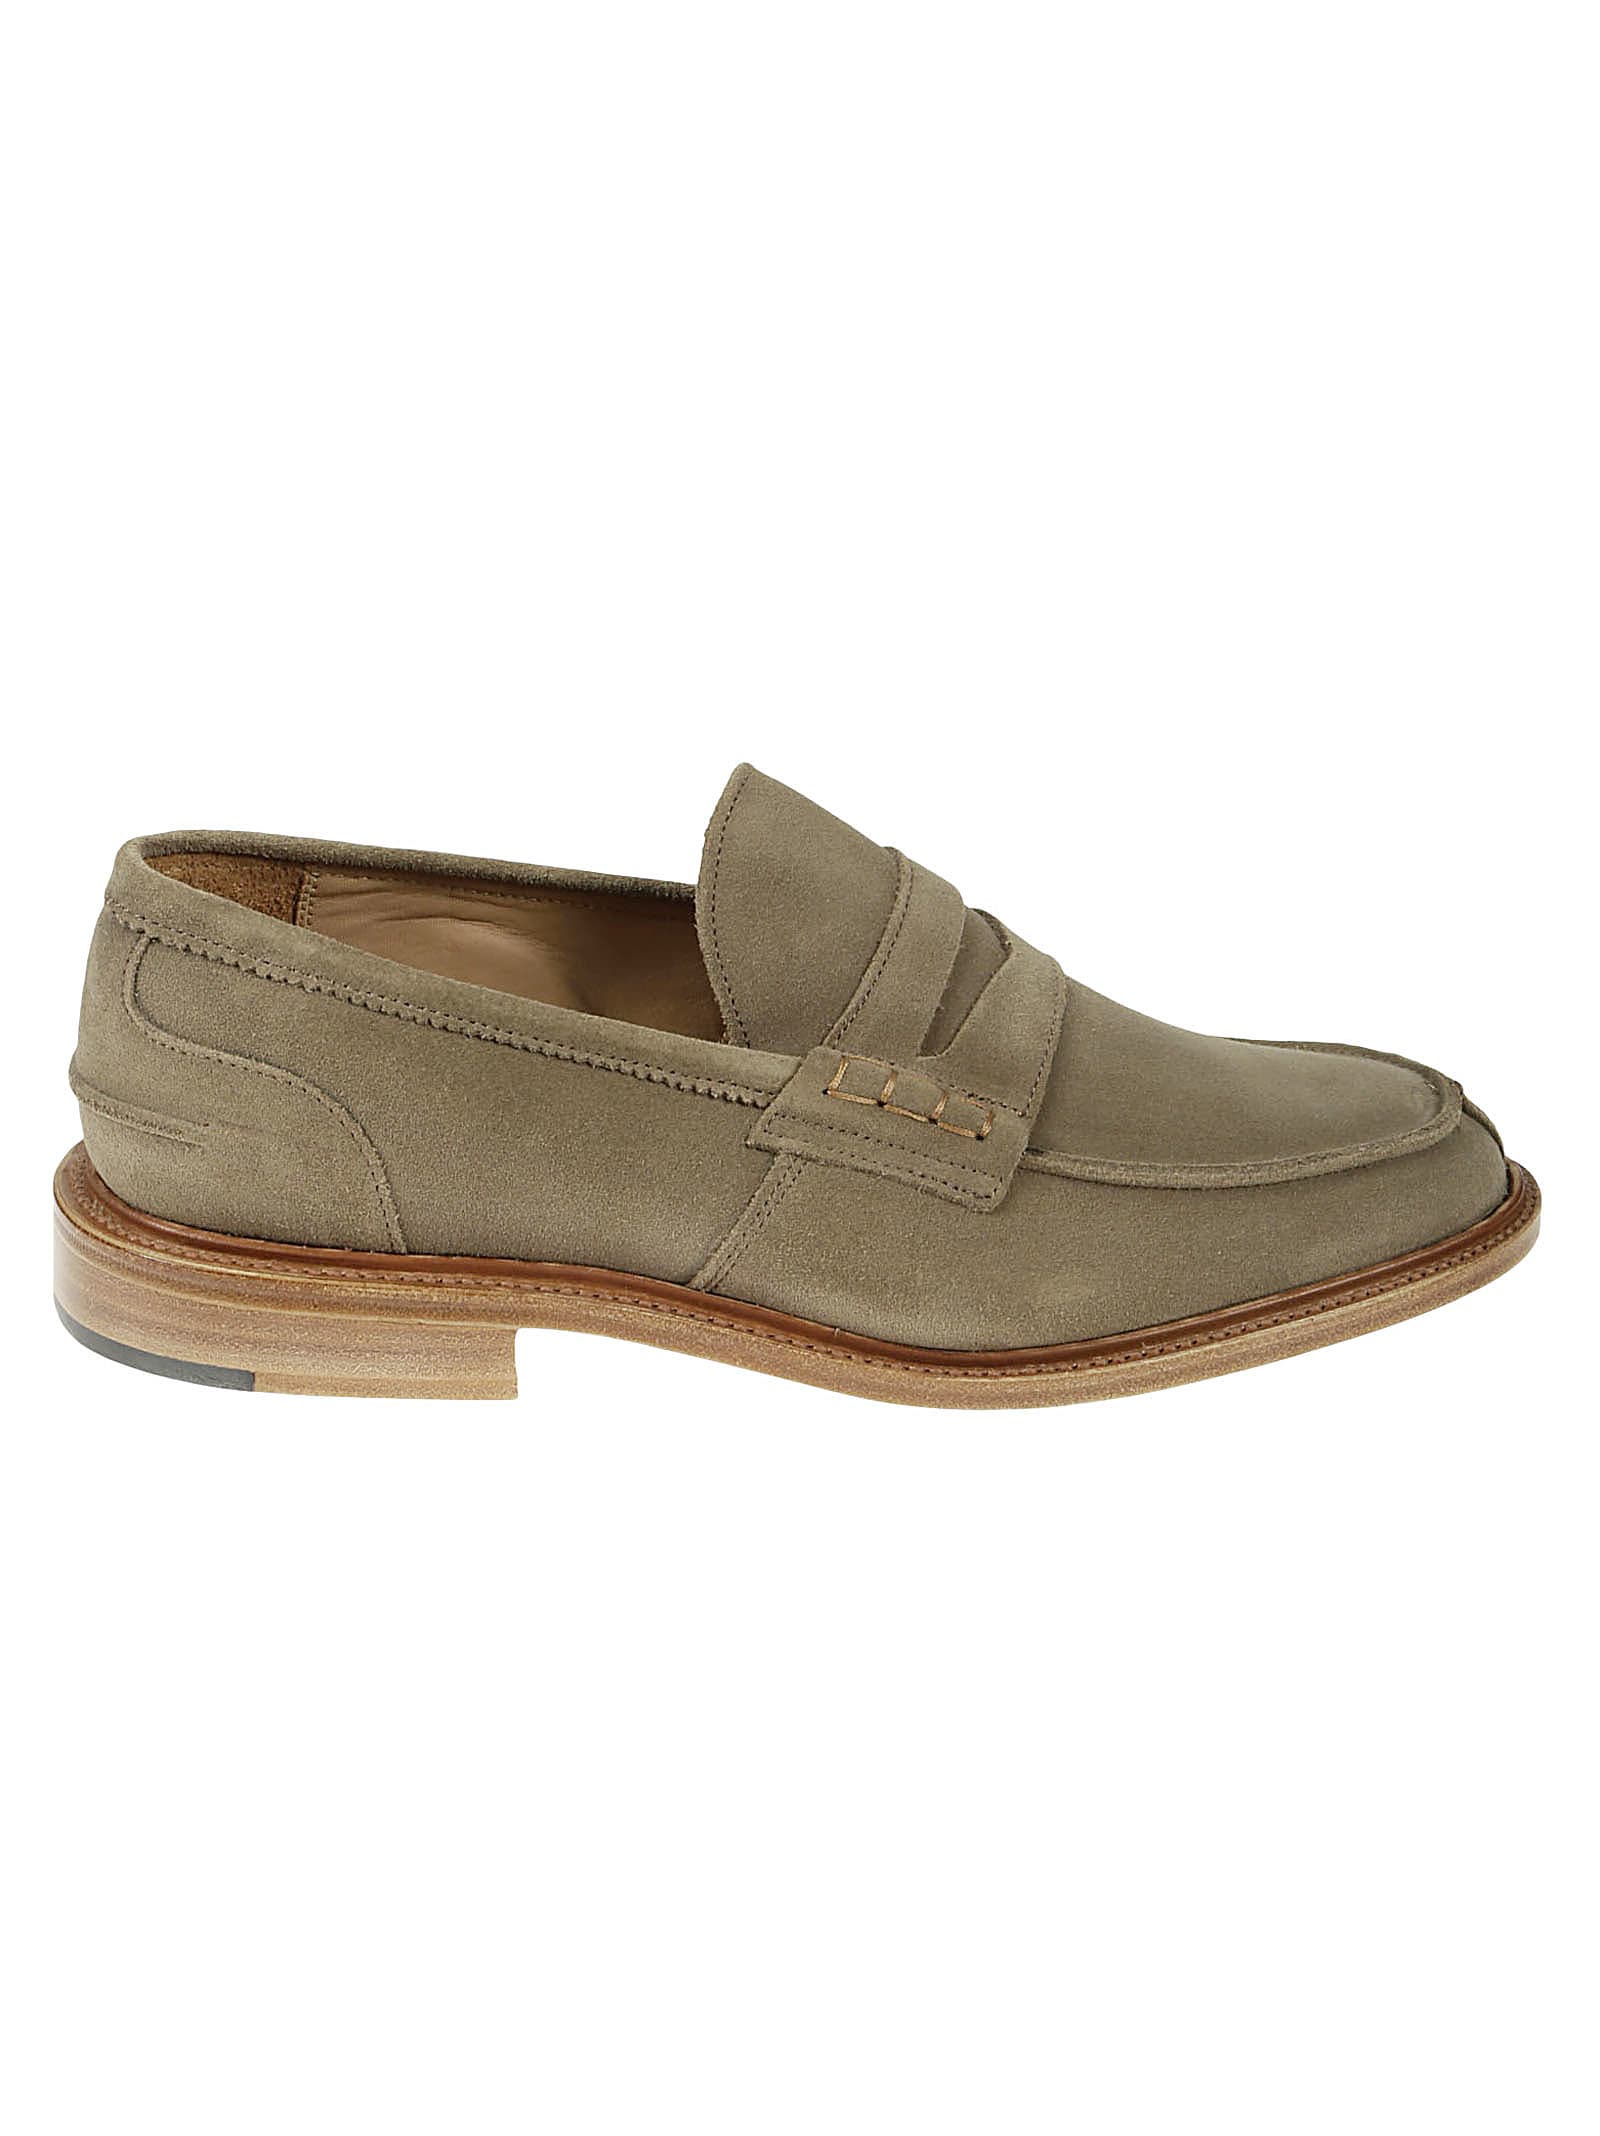 TRICKER'S JAMES PENNY LOAFER SUEDE